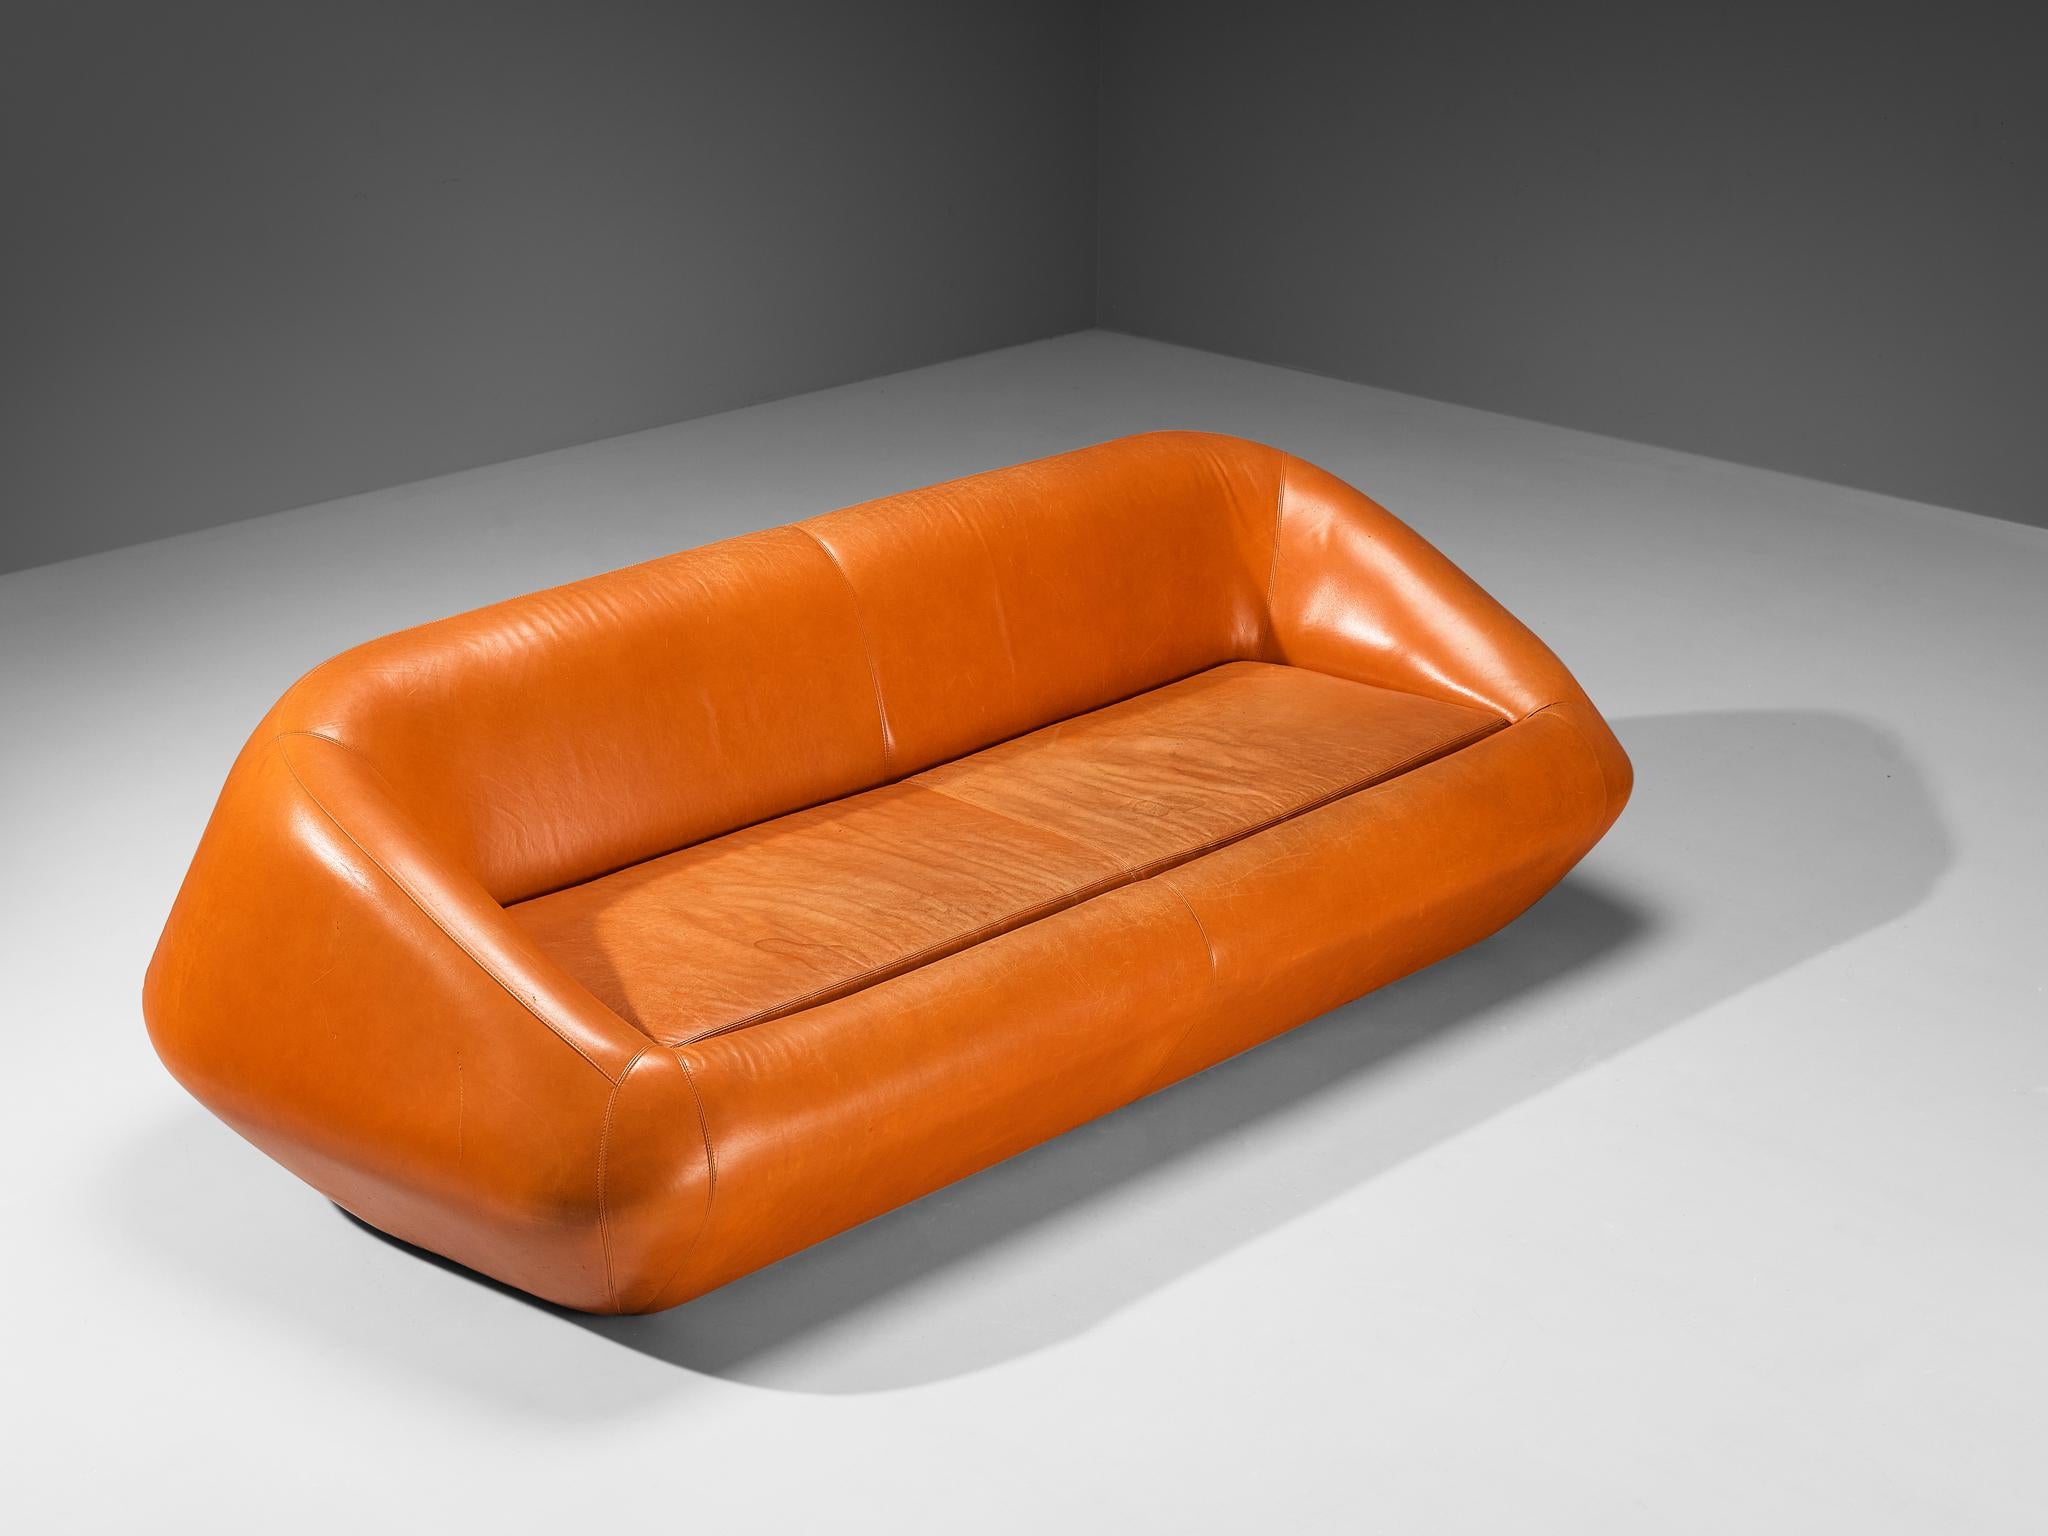 Three seat sofa, leather, Europe, 1970s

Exiting sofa design with strong space age characteristics. This sofa was made in Europe in the 1970s and clearly expresses the post-modern traits of that period in furniture design. Design in the seventies